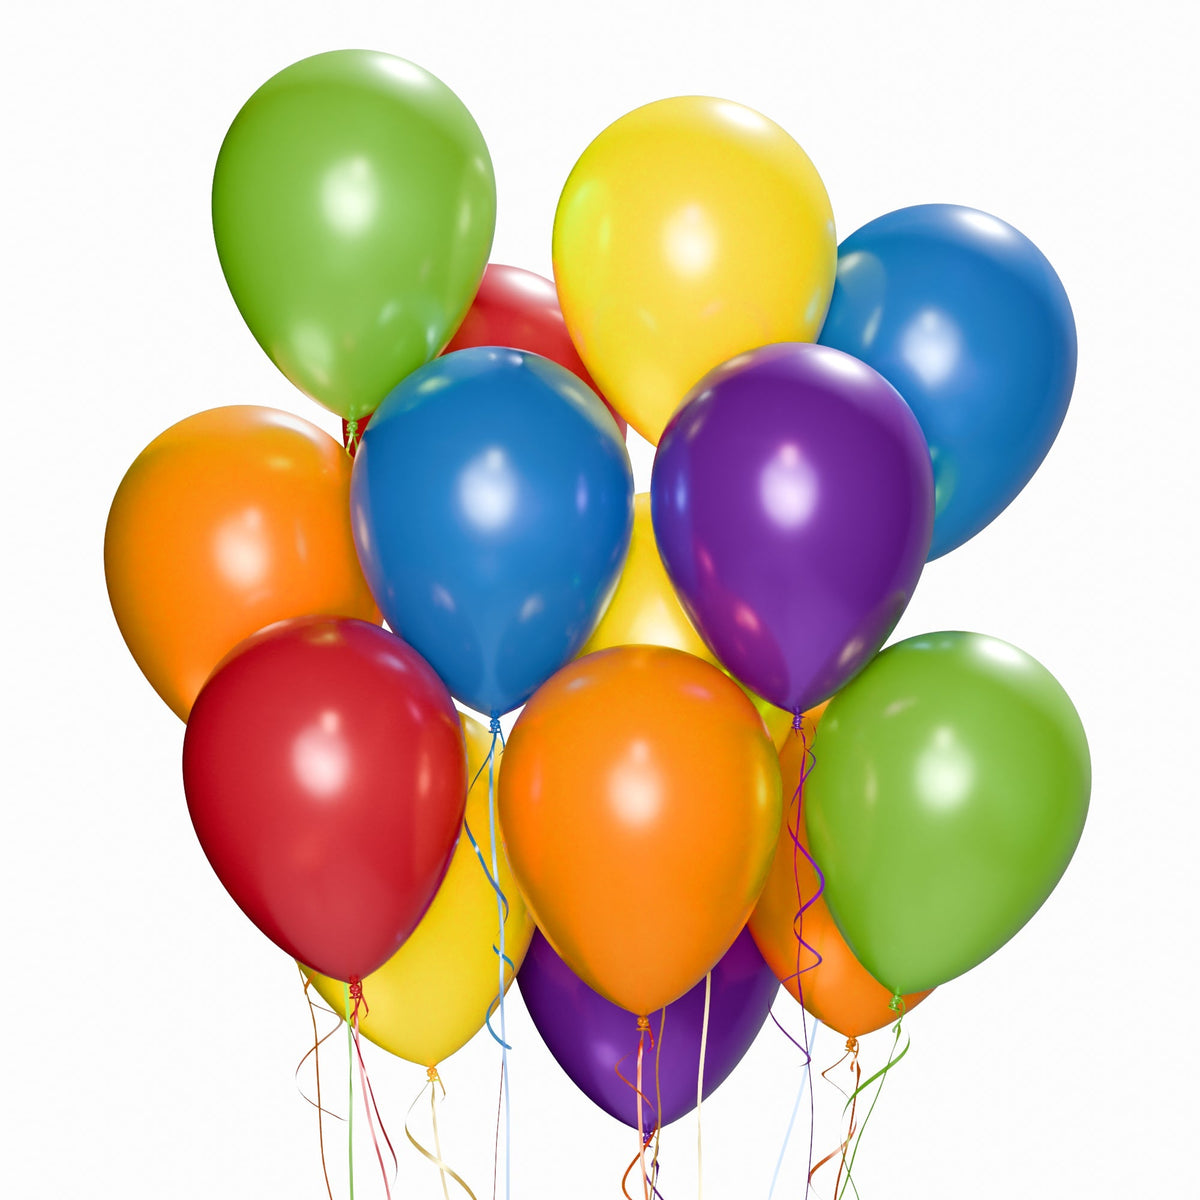 WIDE OCEAN INTERNATIONAL TRADE BEIJING CO., LTD Balloons Assorted Color Latex Balloon 12 Inches, 72 Count 810064198236